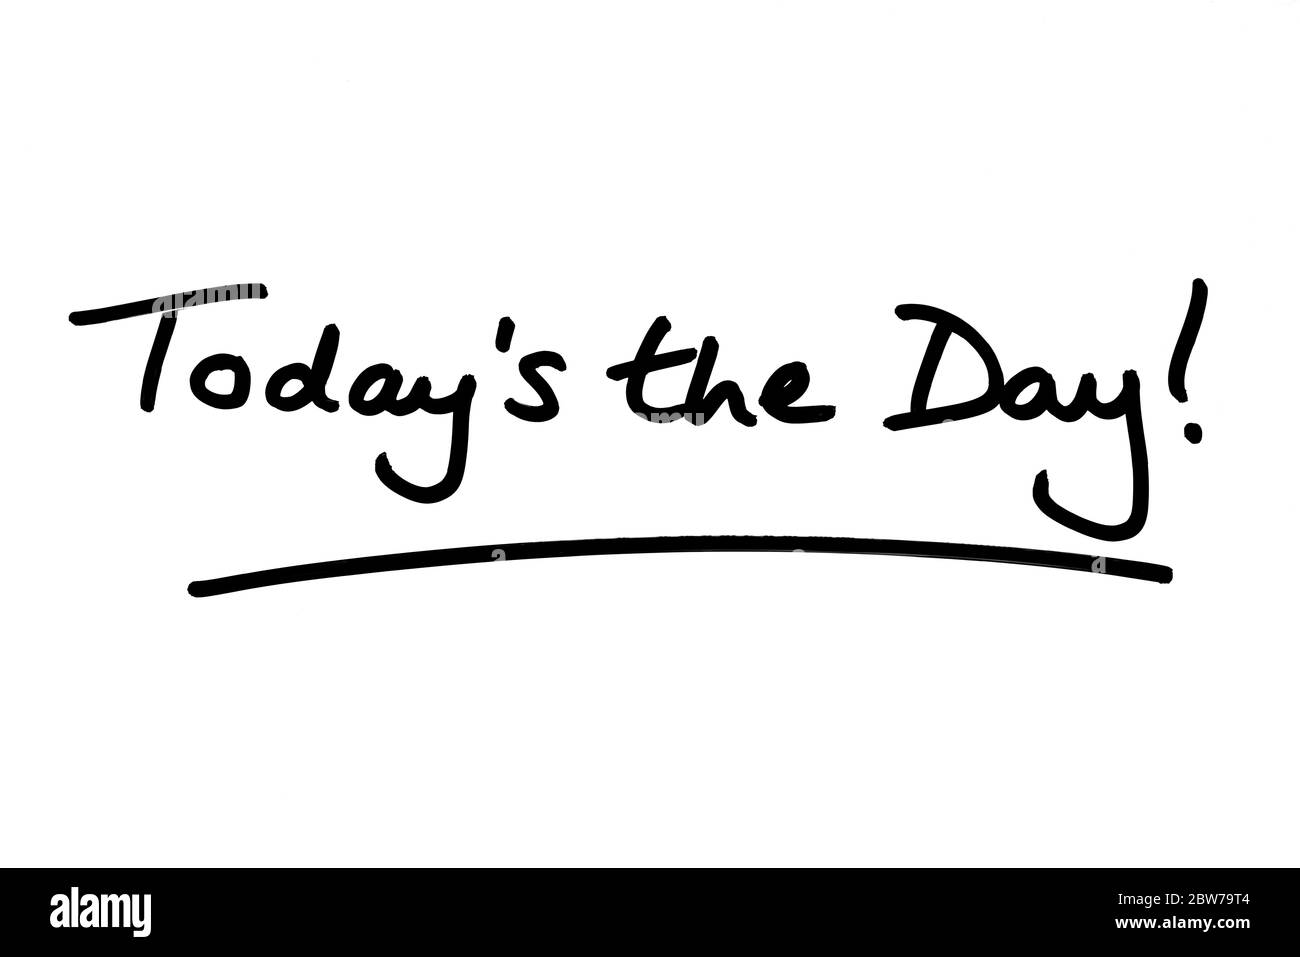 Todays the Day! handwritten on a white background. Stock Photo